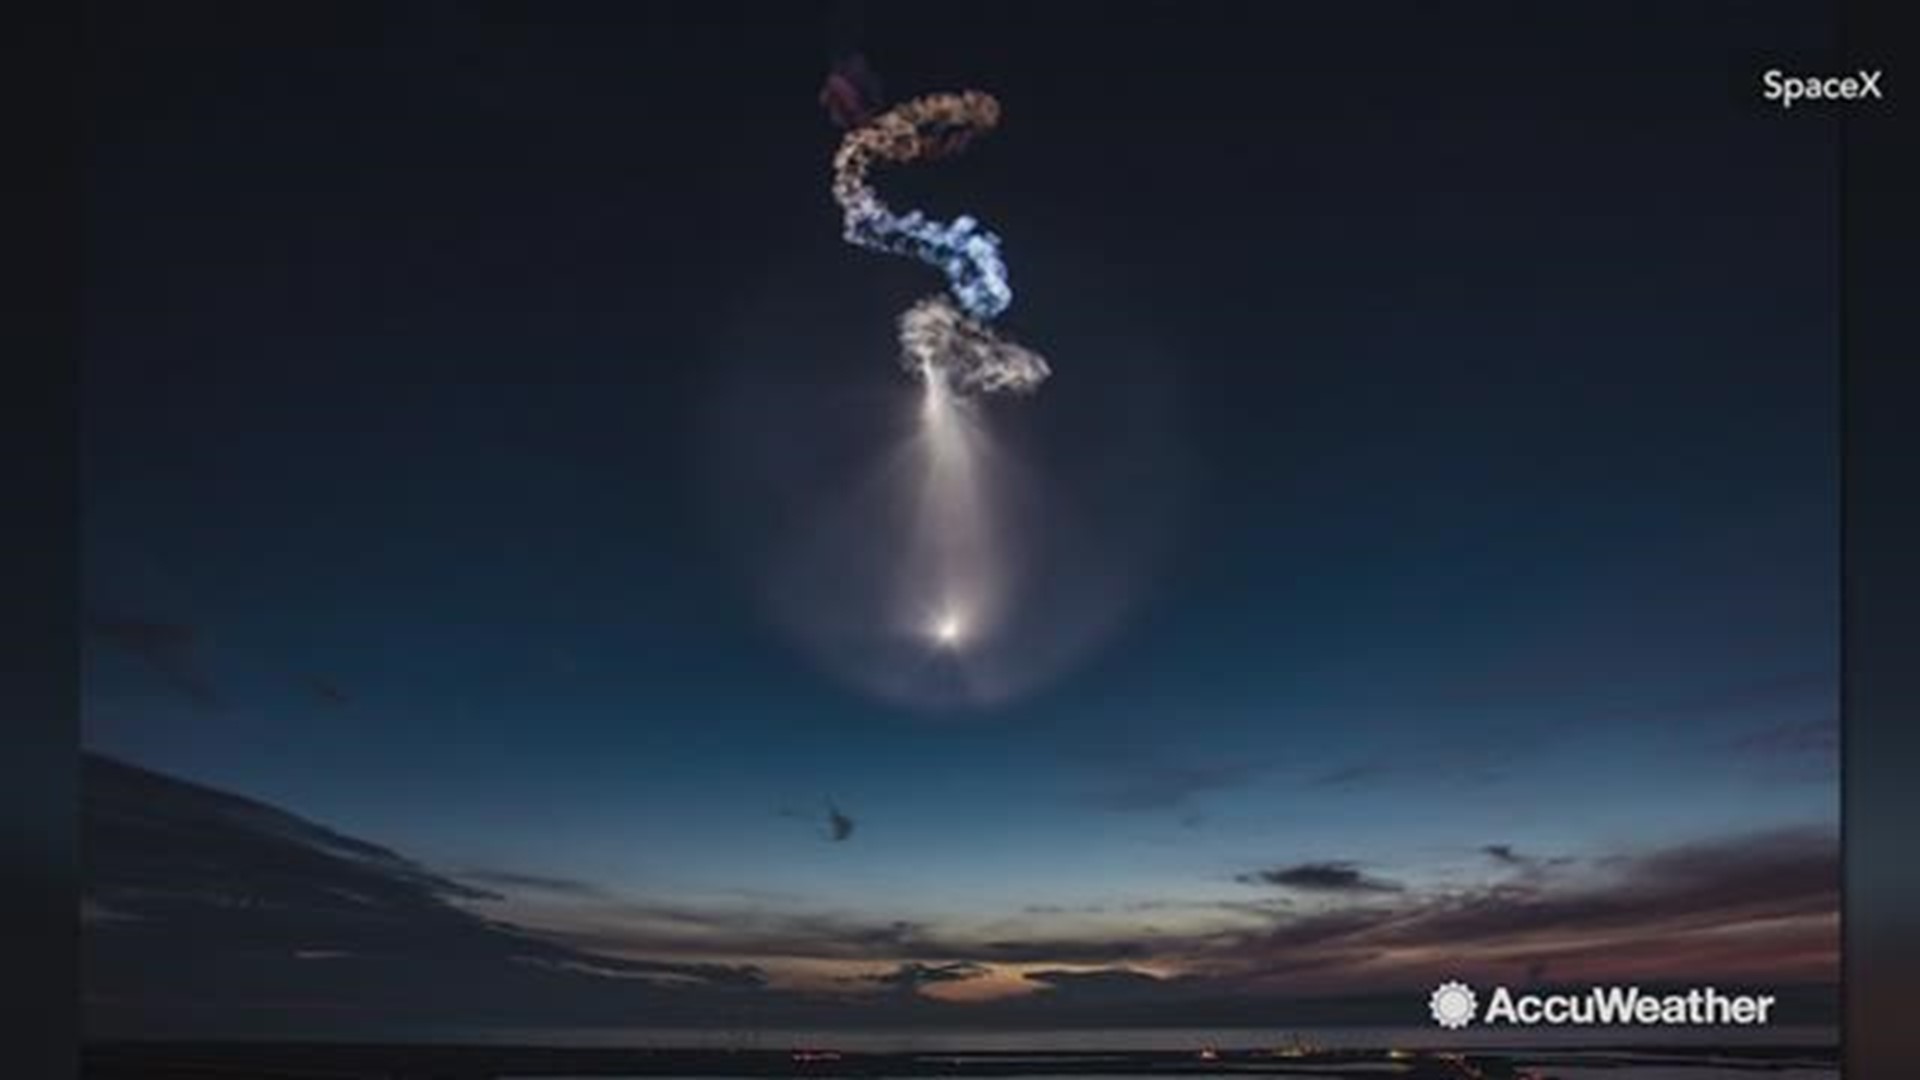 The Falcon 9 rocket launched on June 29 carrying the Dragon cargo craft enroute to the International Space Station.  It will deliver supplies for astronauts on board.  SpaceX shared some impressive photos of the launch as  it took place.